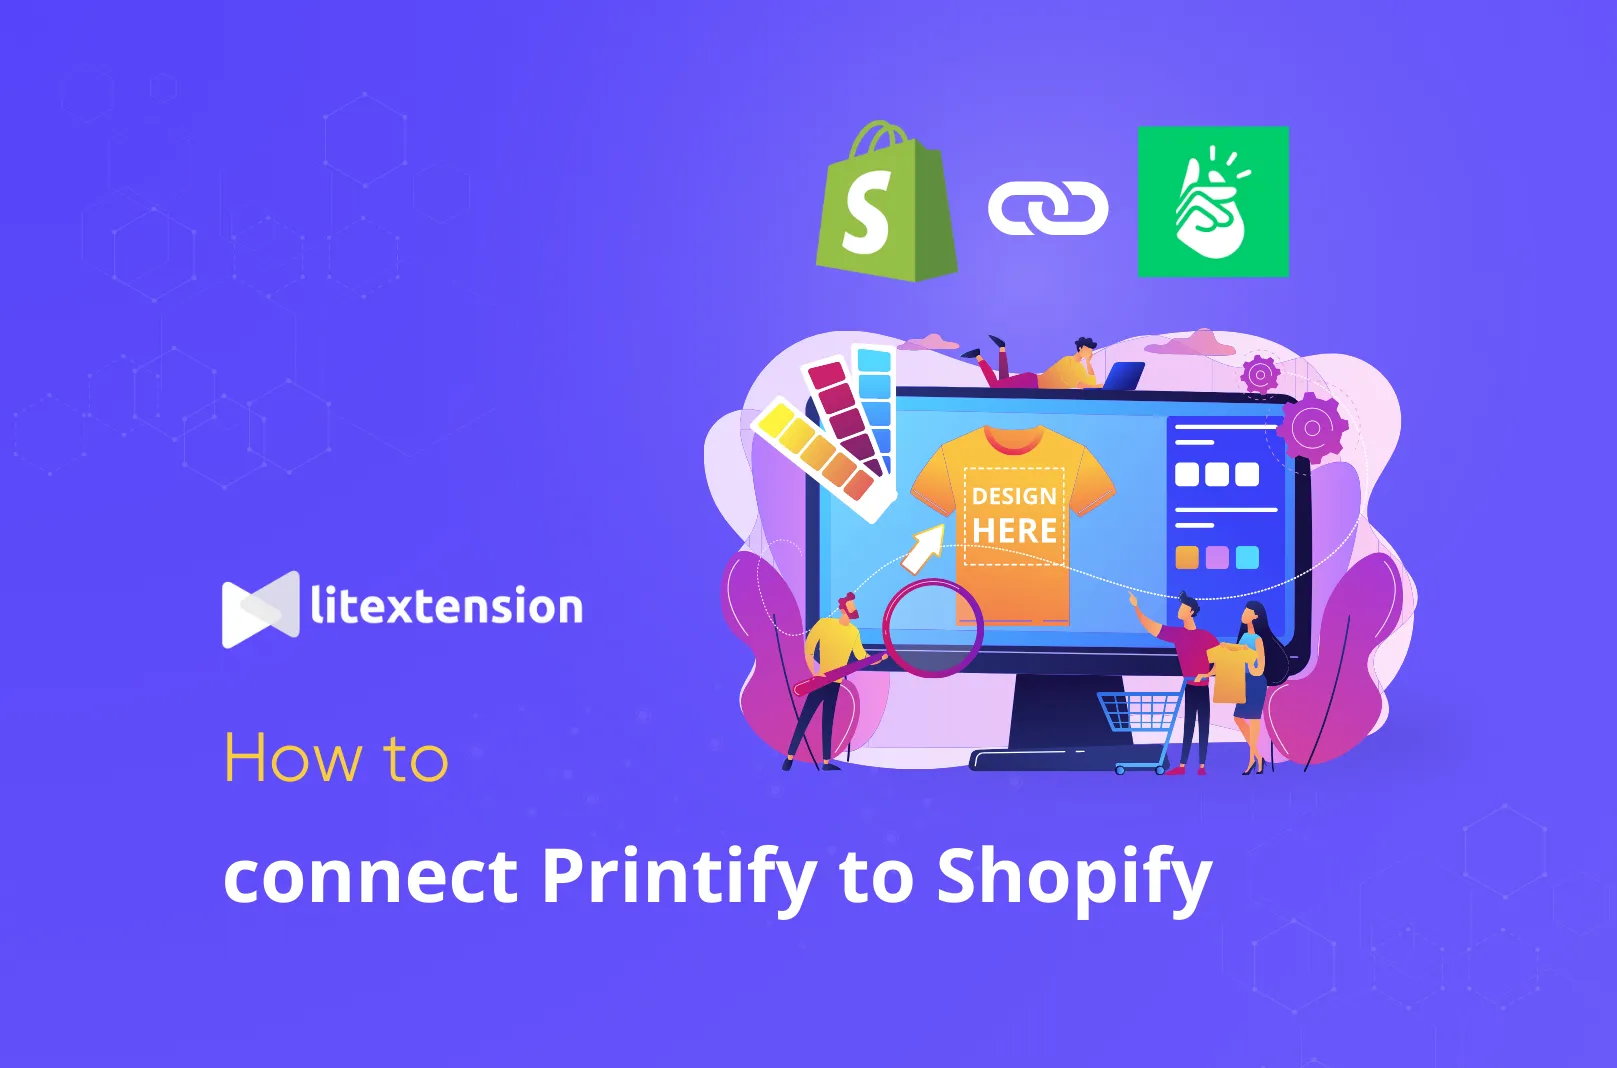 Seamless ecommerce: Can You Link Wix to Shopify?